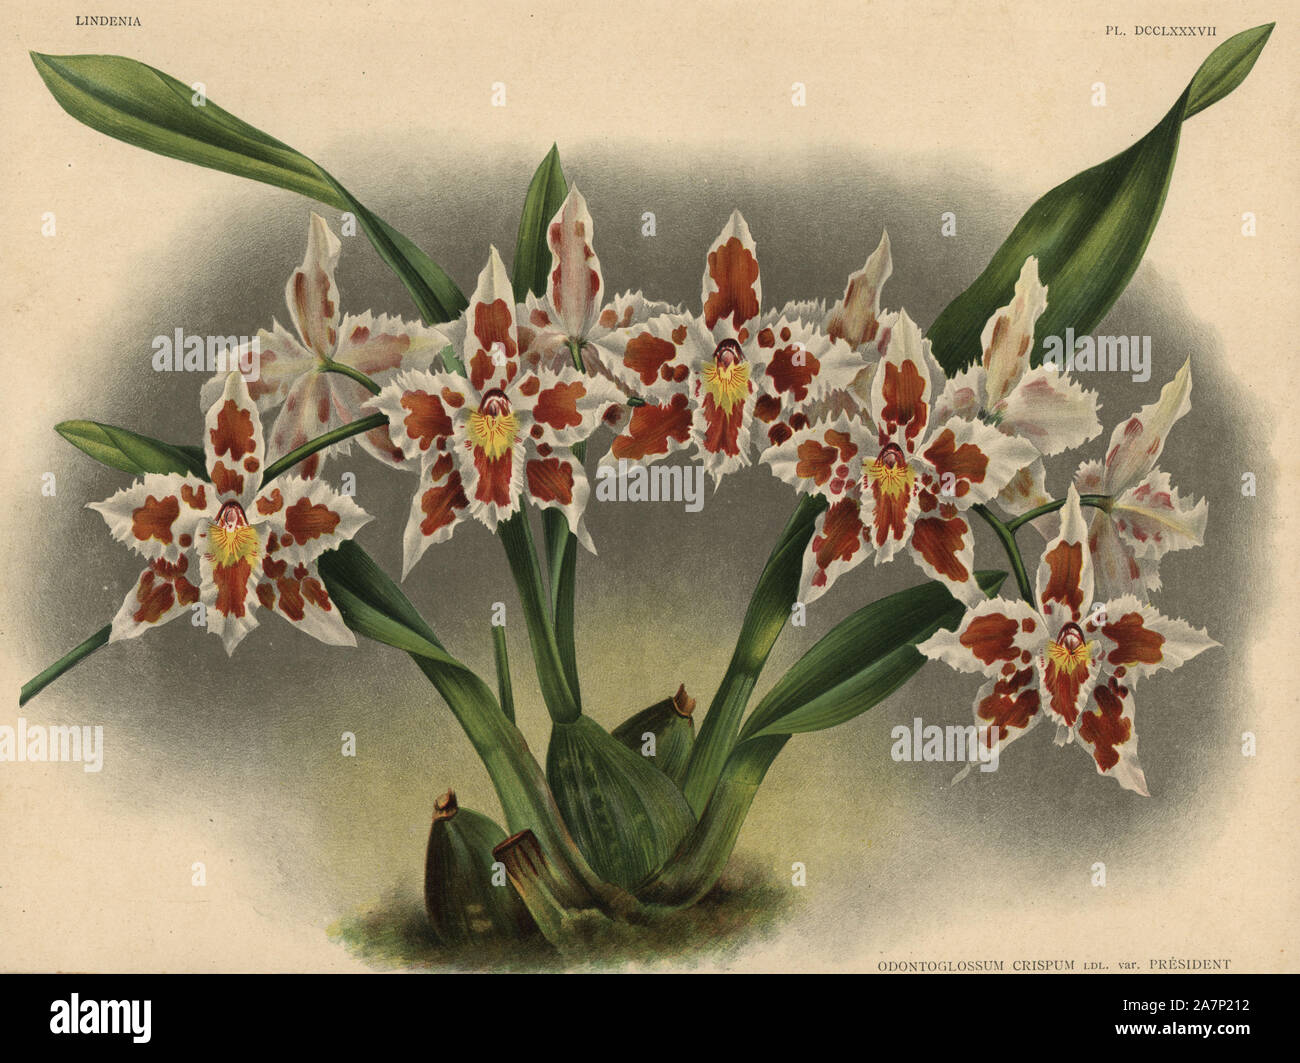 President Roosevelt variety of Odontoglossum crispum orchid. Botanical illustration in chromolithograph from Lucien Linden's 'Lindenia, Iconographie des Orchidees,' Brussels, 1902. Stock Photo